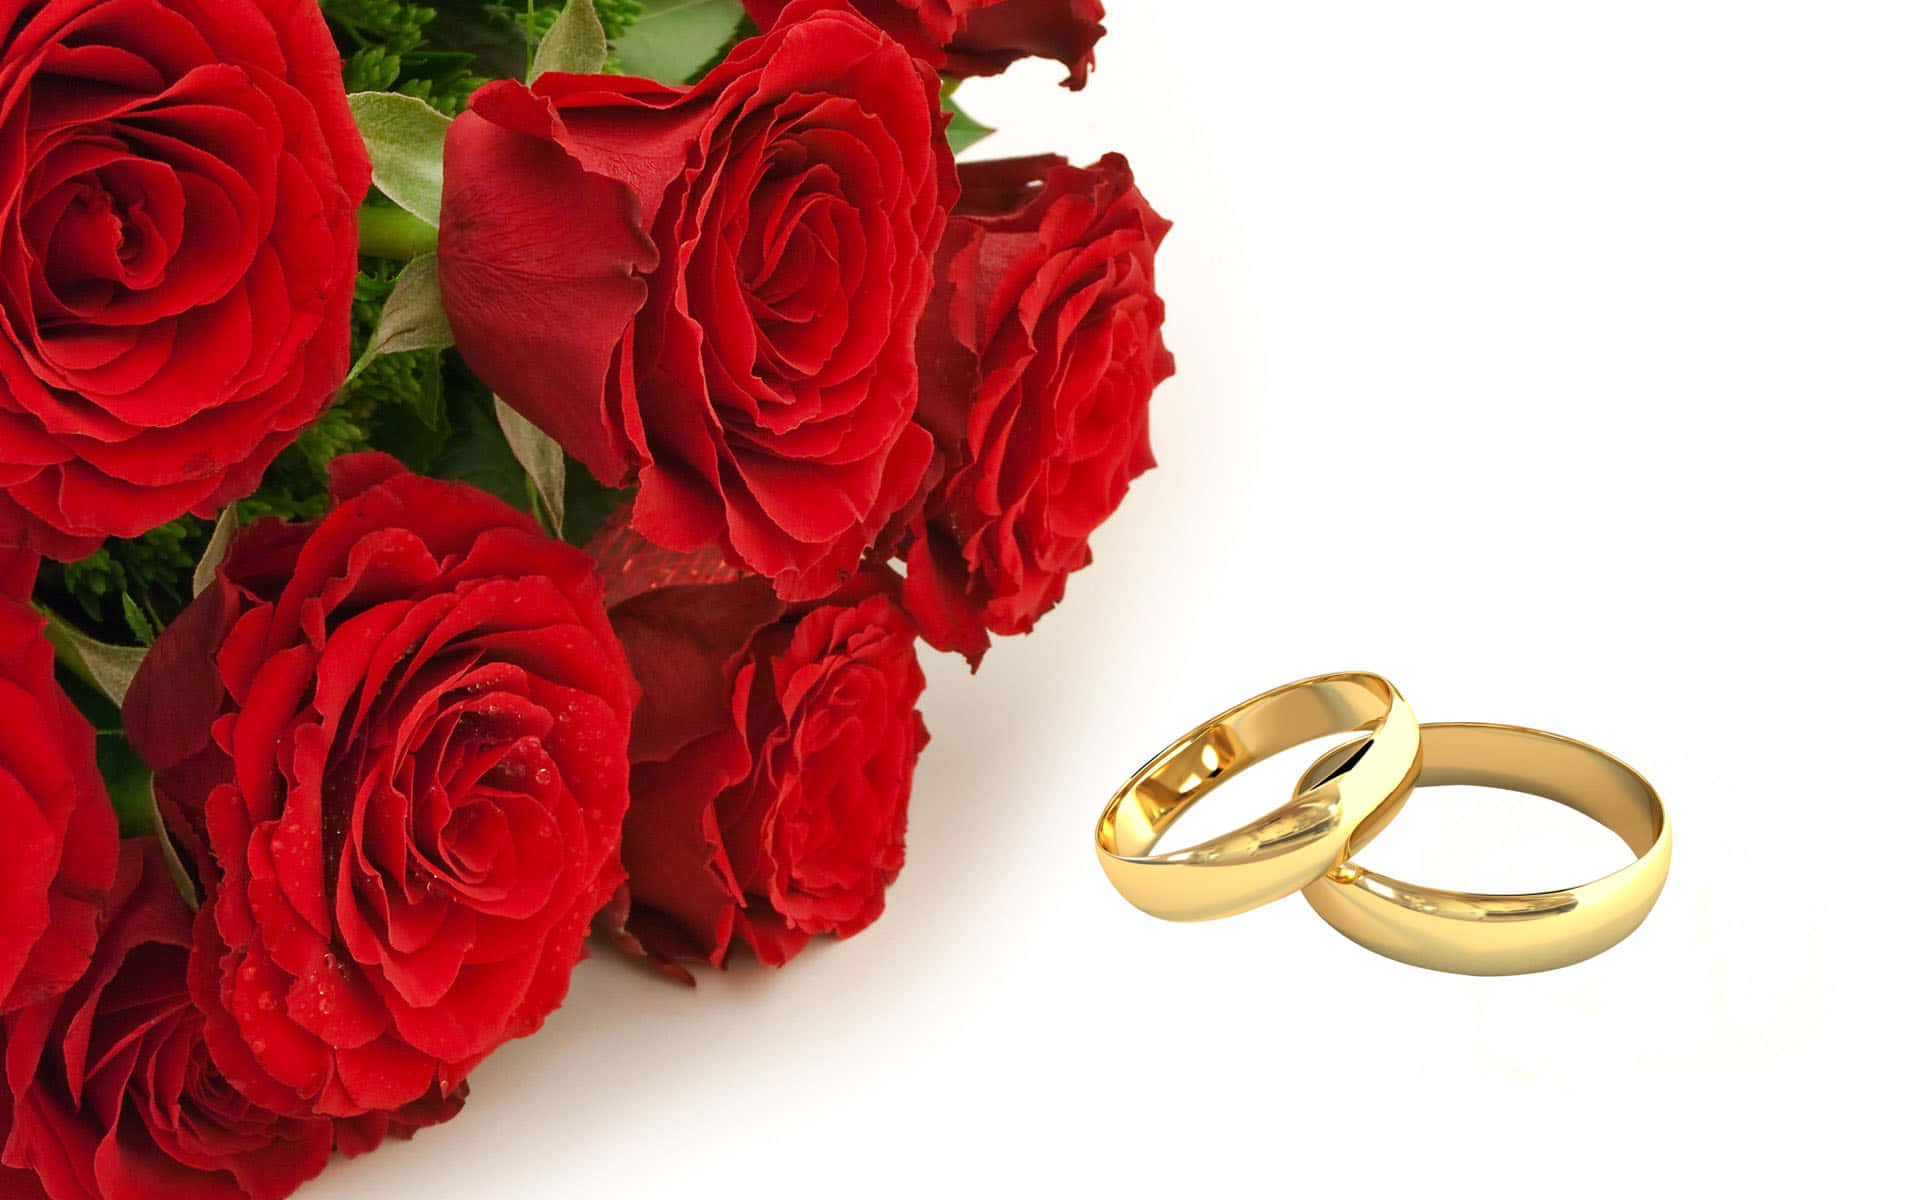 Roses And Golden Wedding Ring Wallpaper